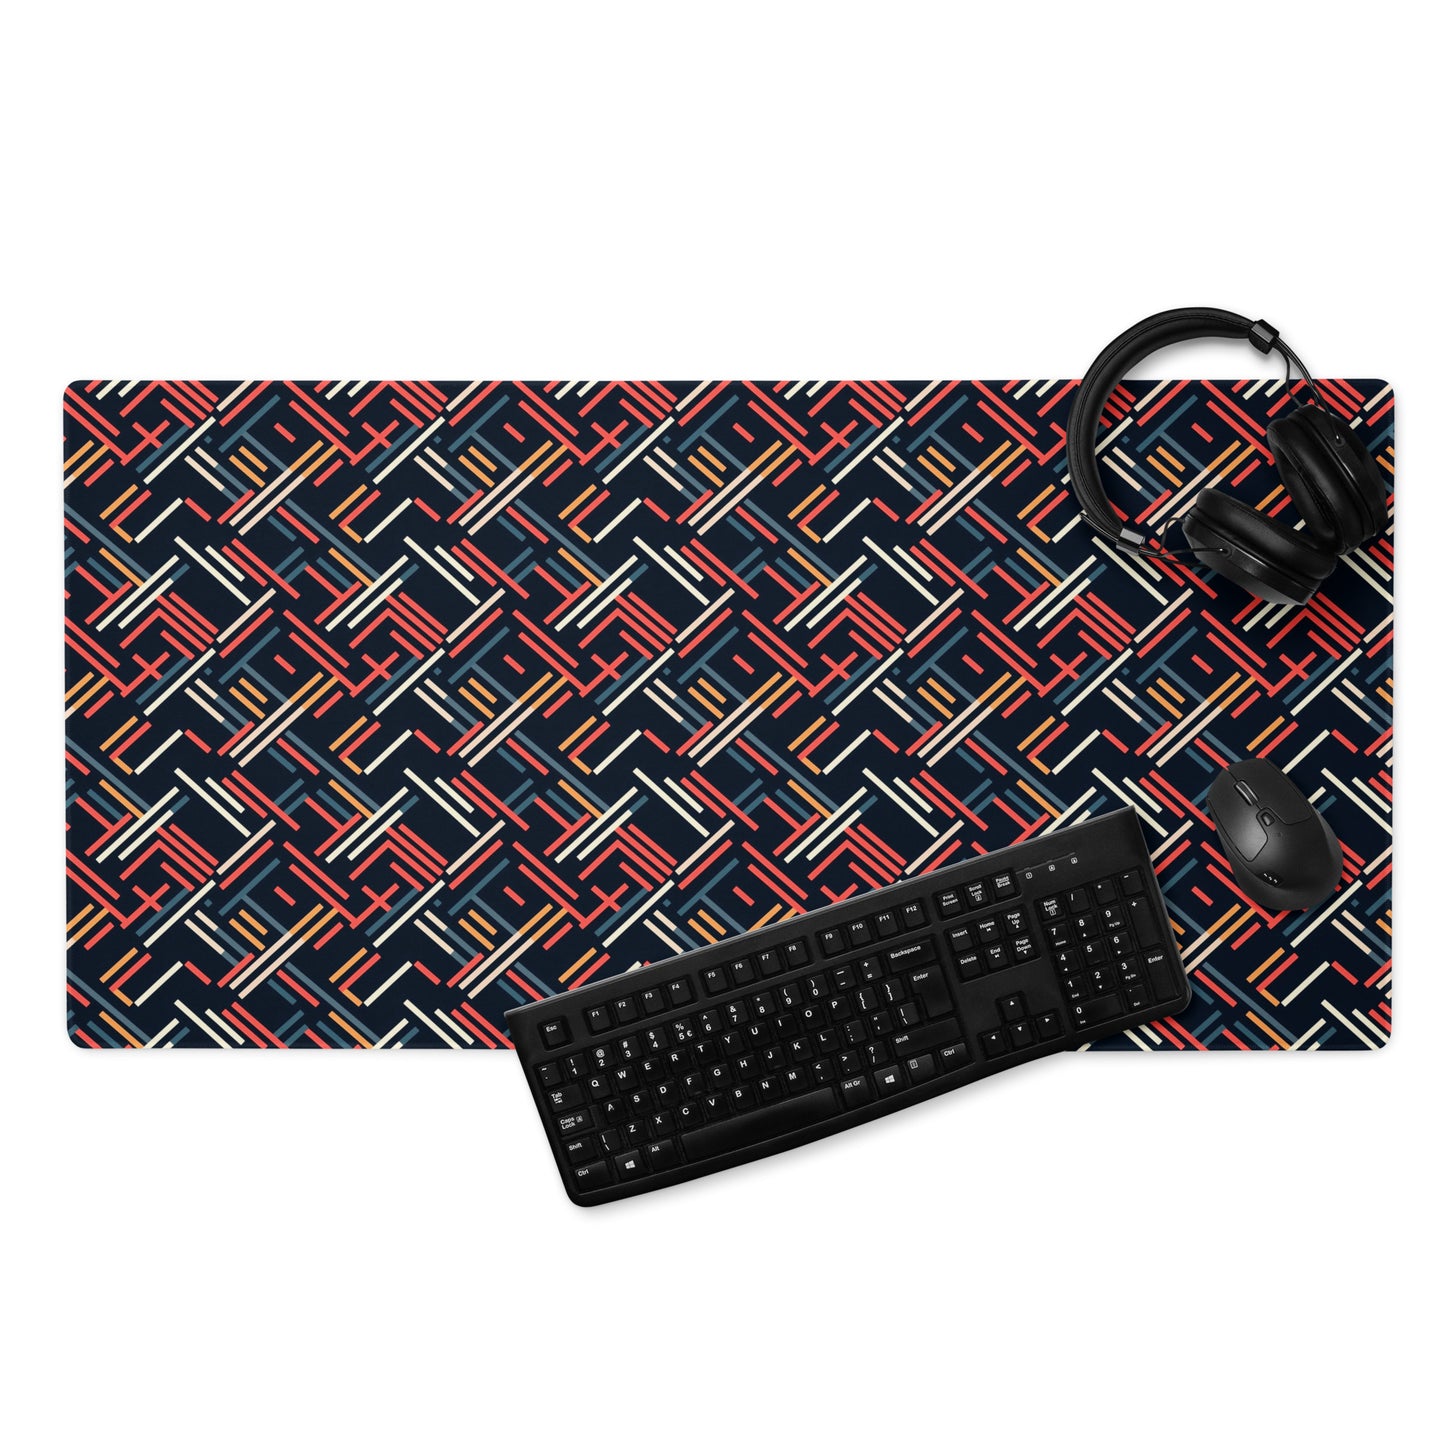 A 36" x 18" gaming desk pad with red, blue, white, and orange lines on a black background. A keyboard, mouse, and headphones sit on it.